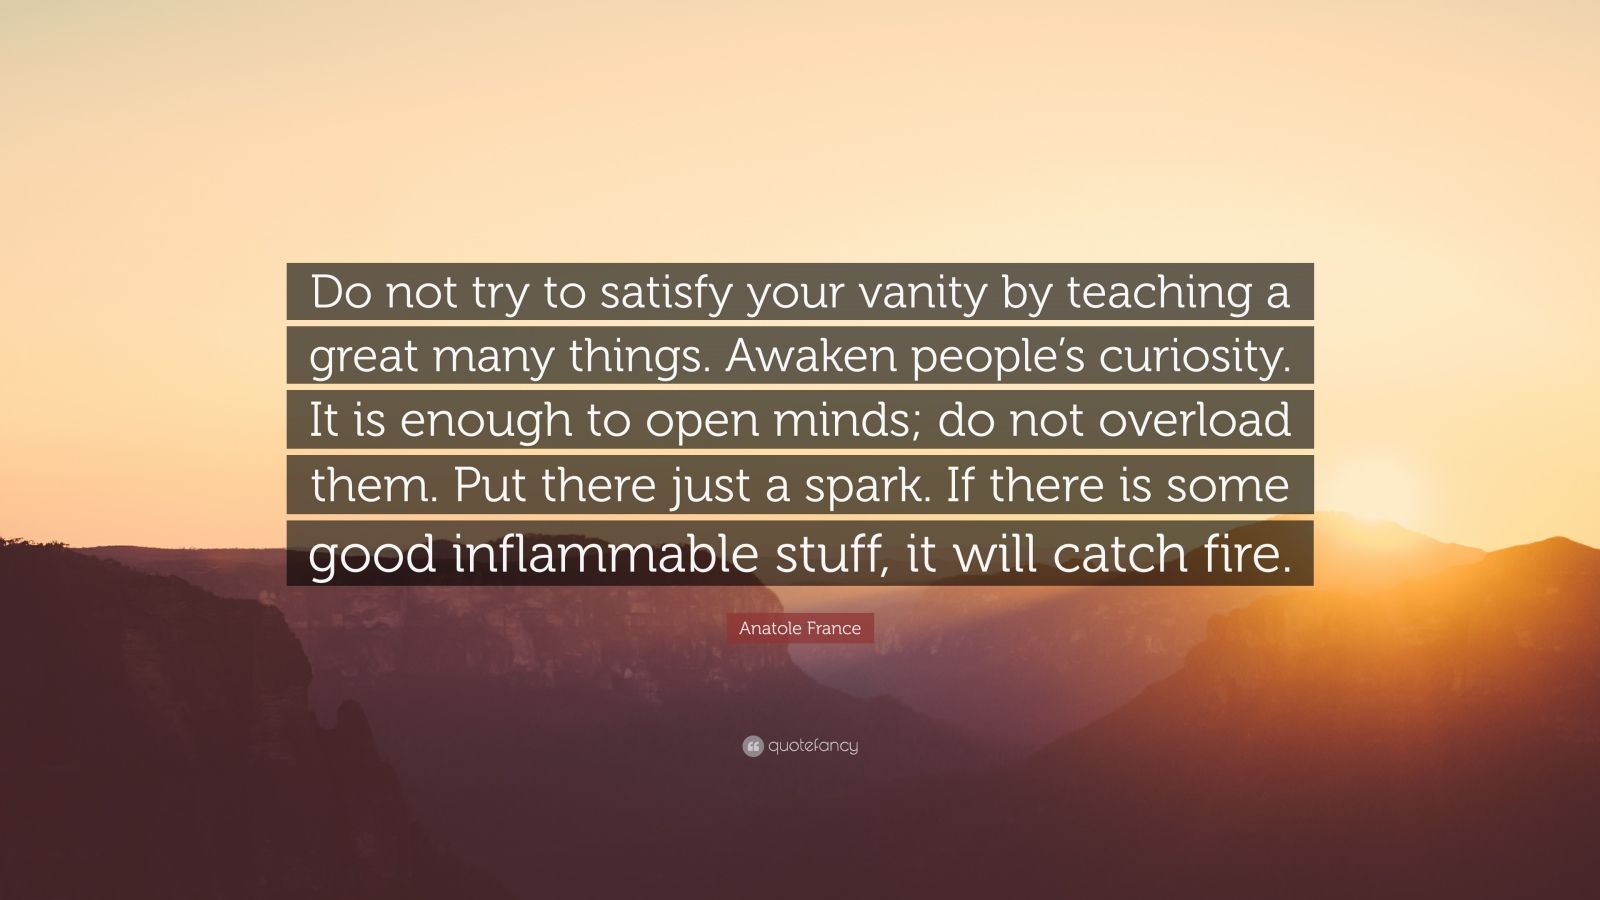 Anatole France Quote: “Do not try to satisfy your vanity by teaching a ...